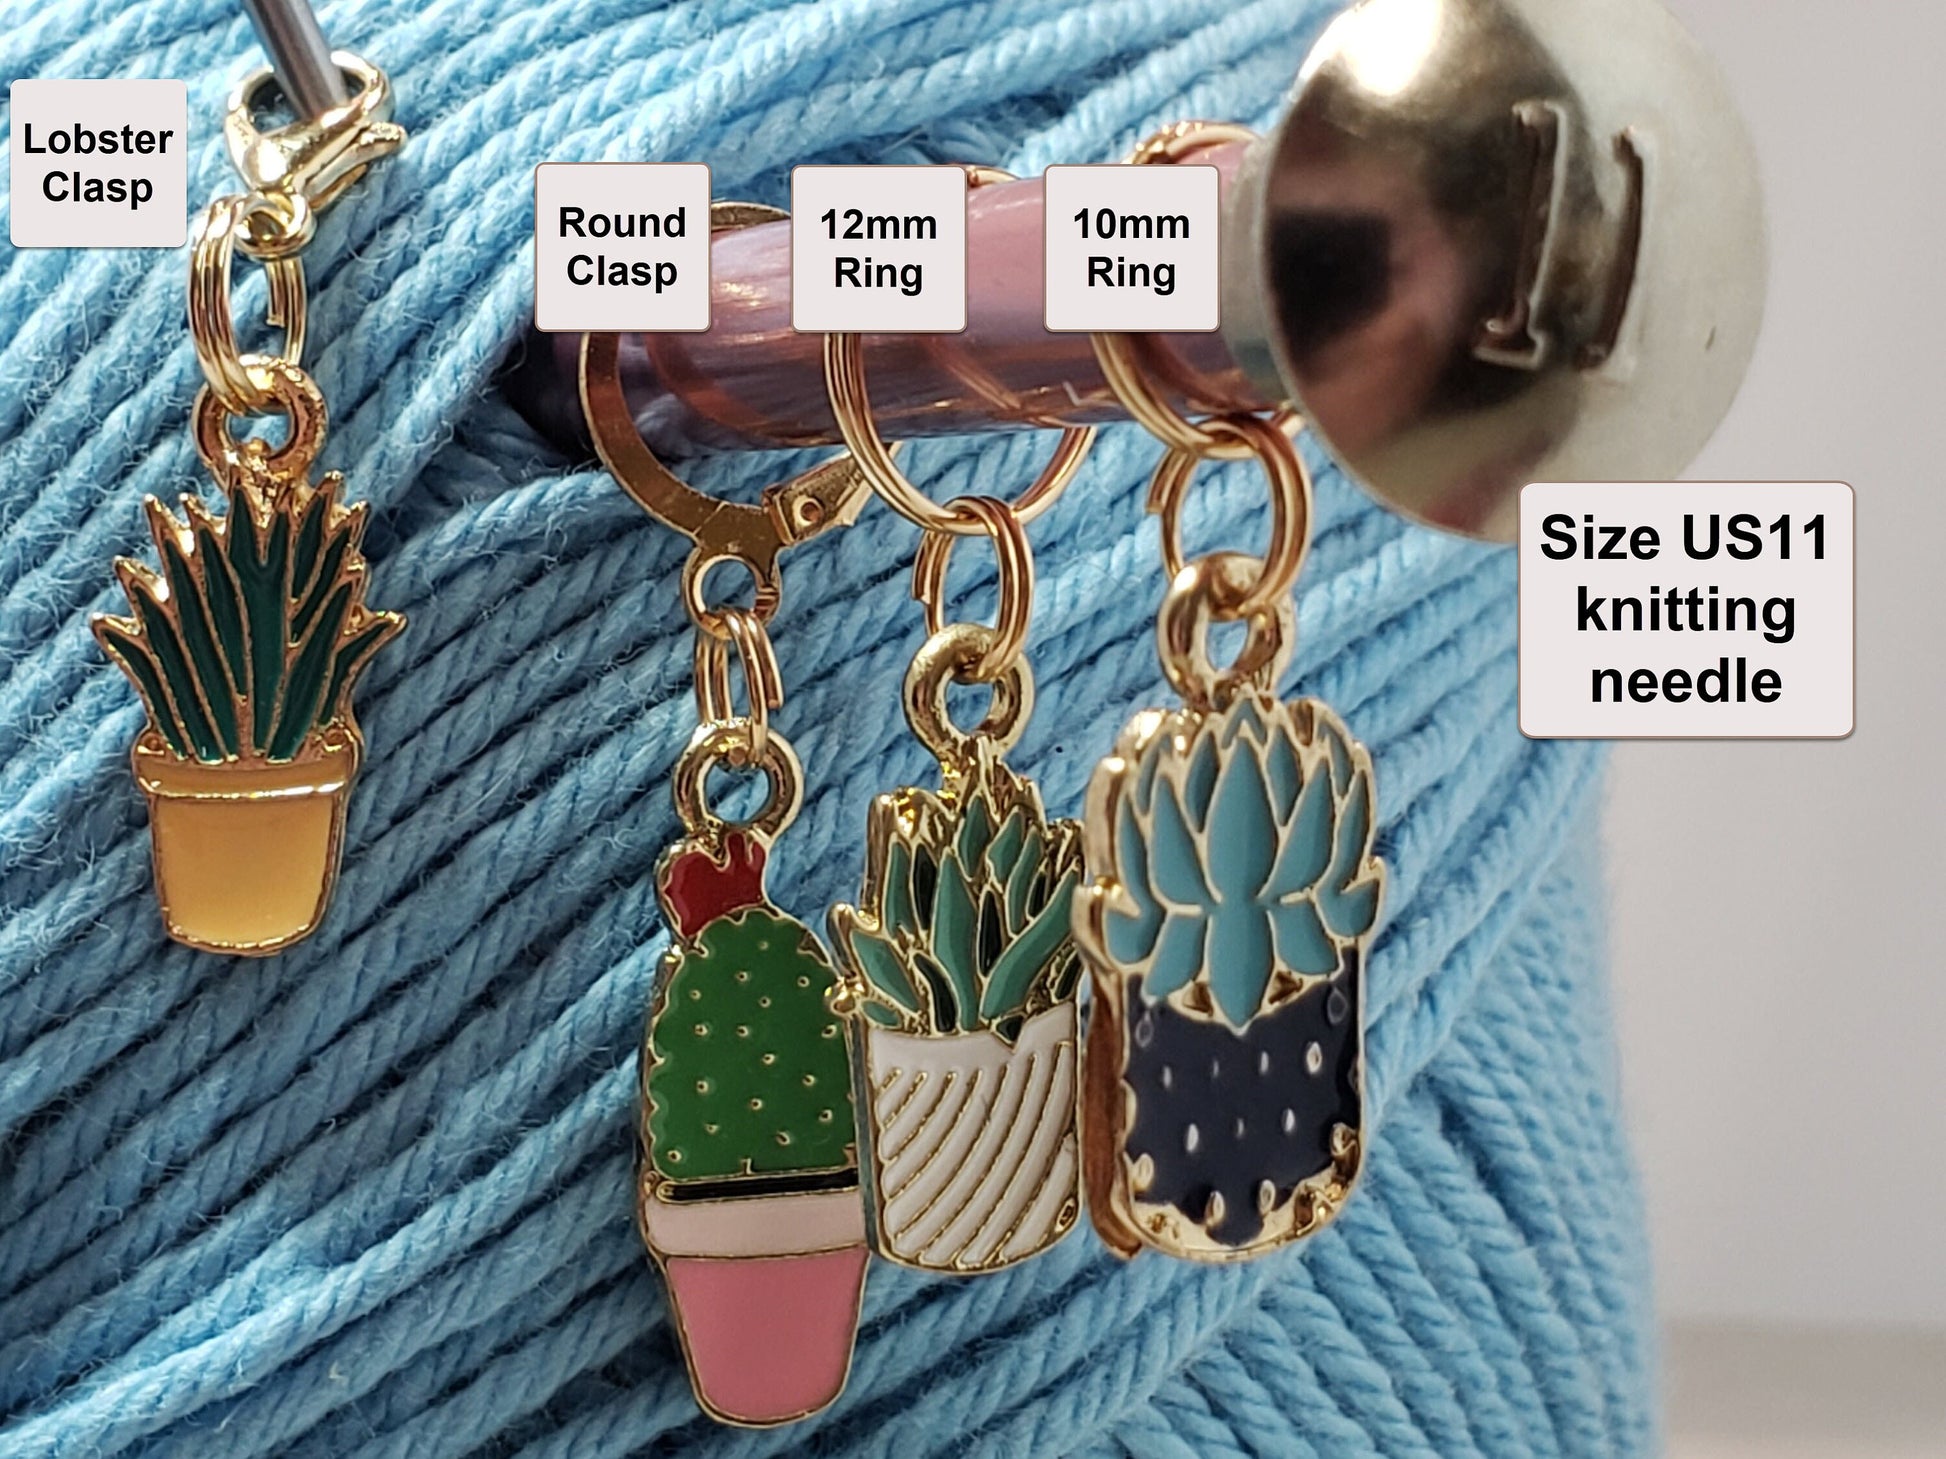 Stitch Markers for Knitting, 4pc Face Mask | Crochet stitch marker, progress keeper, project bag charms, crochet accessories